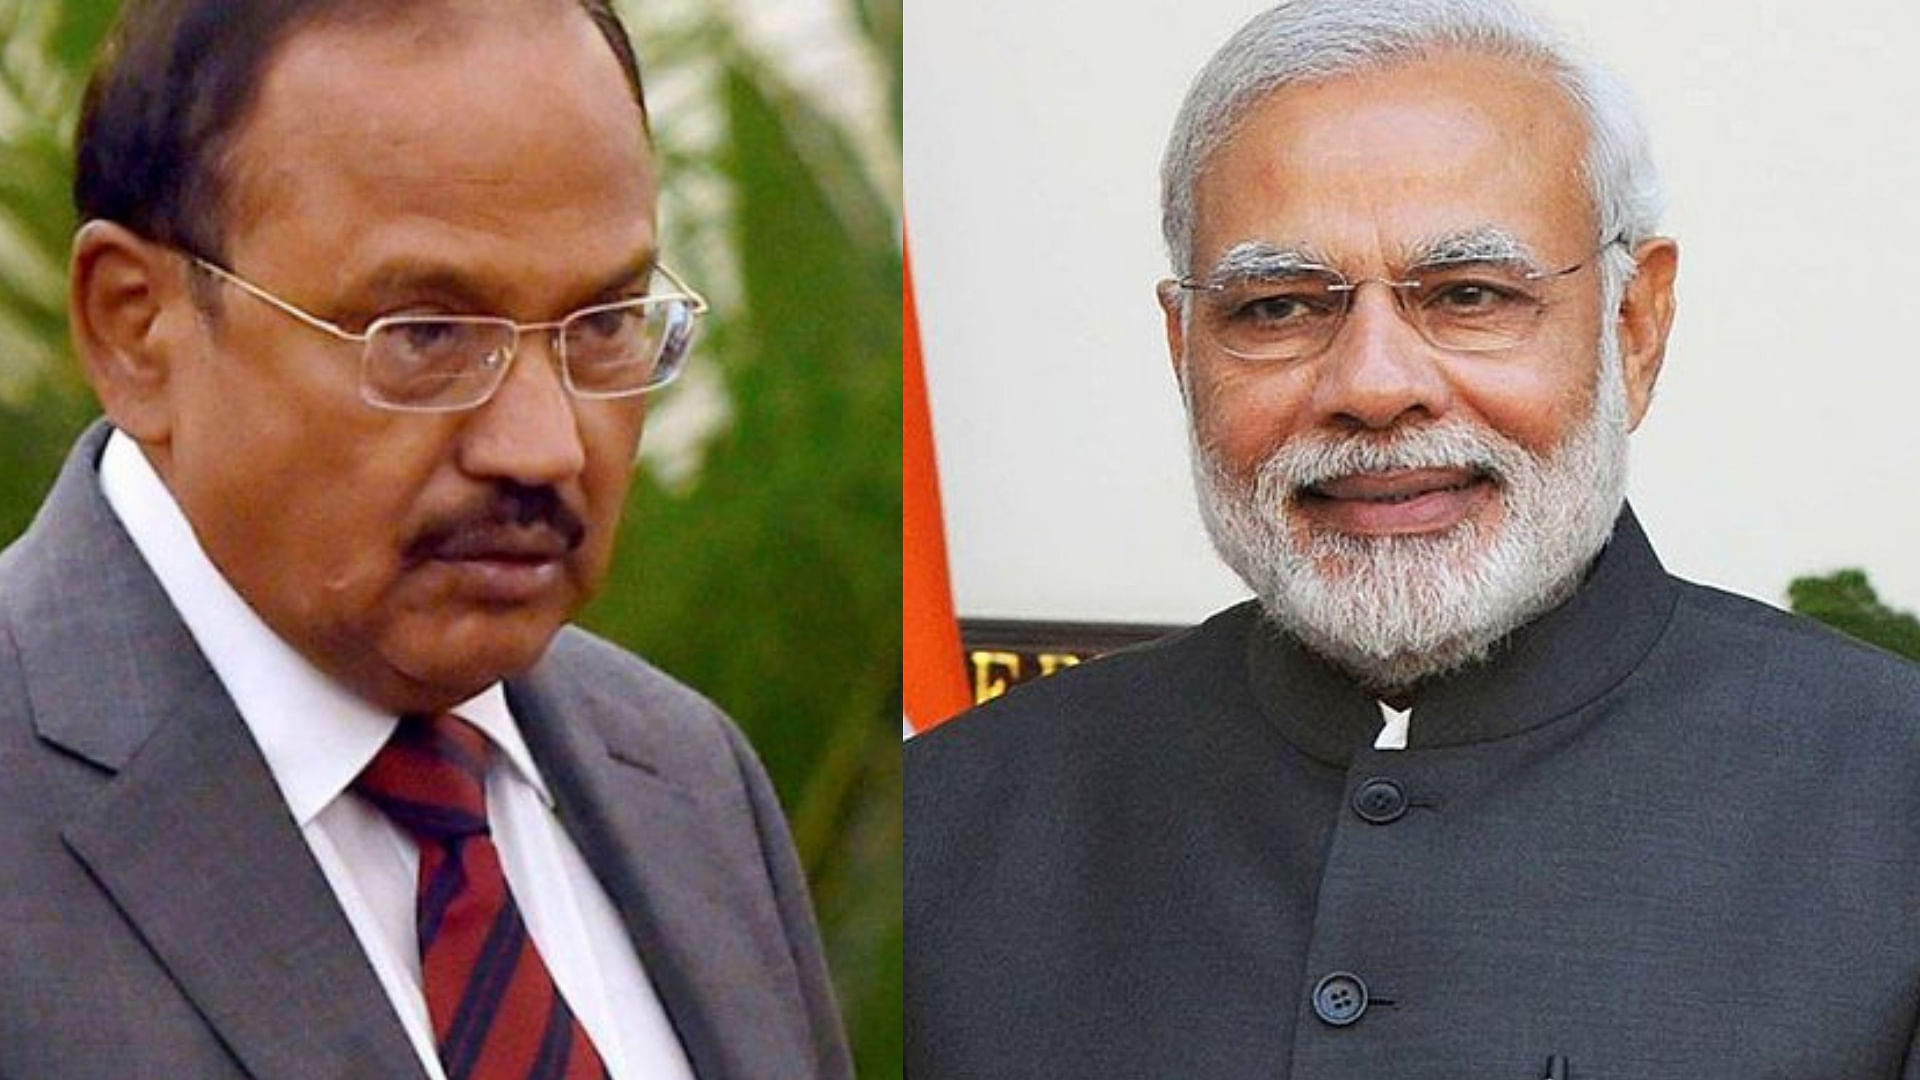 Despite warnings from officials in its own govt, PM Modi and NSA Doval went on ahead to sign the Rafale Deal with the French government, back in 2016.